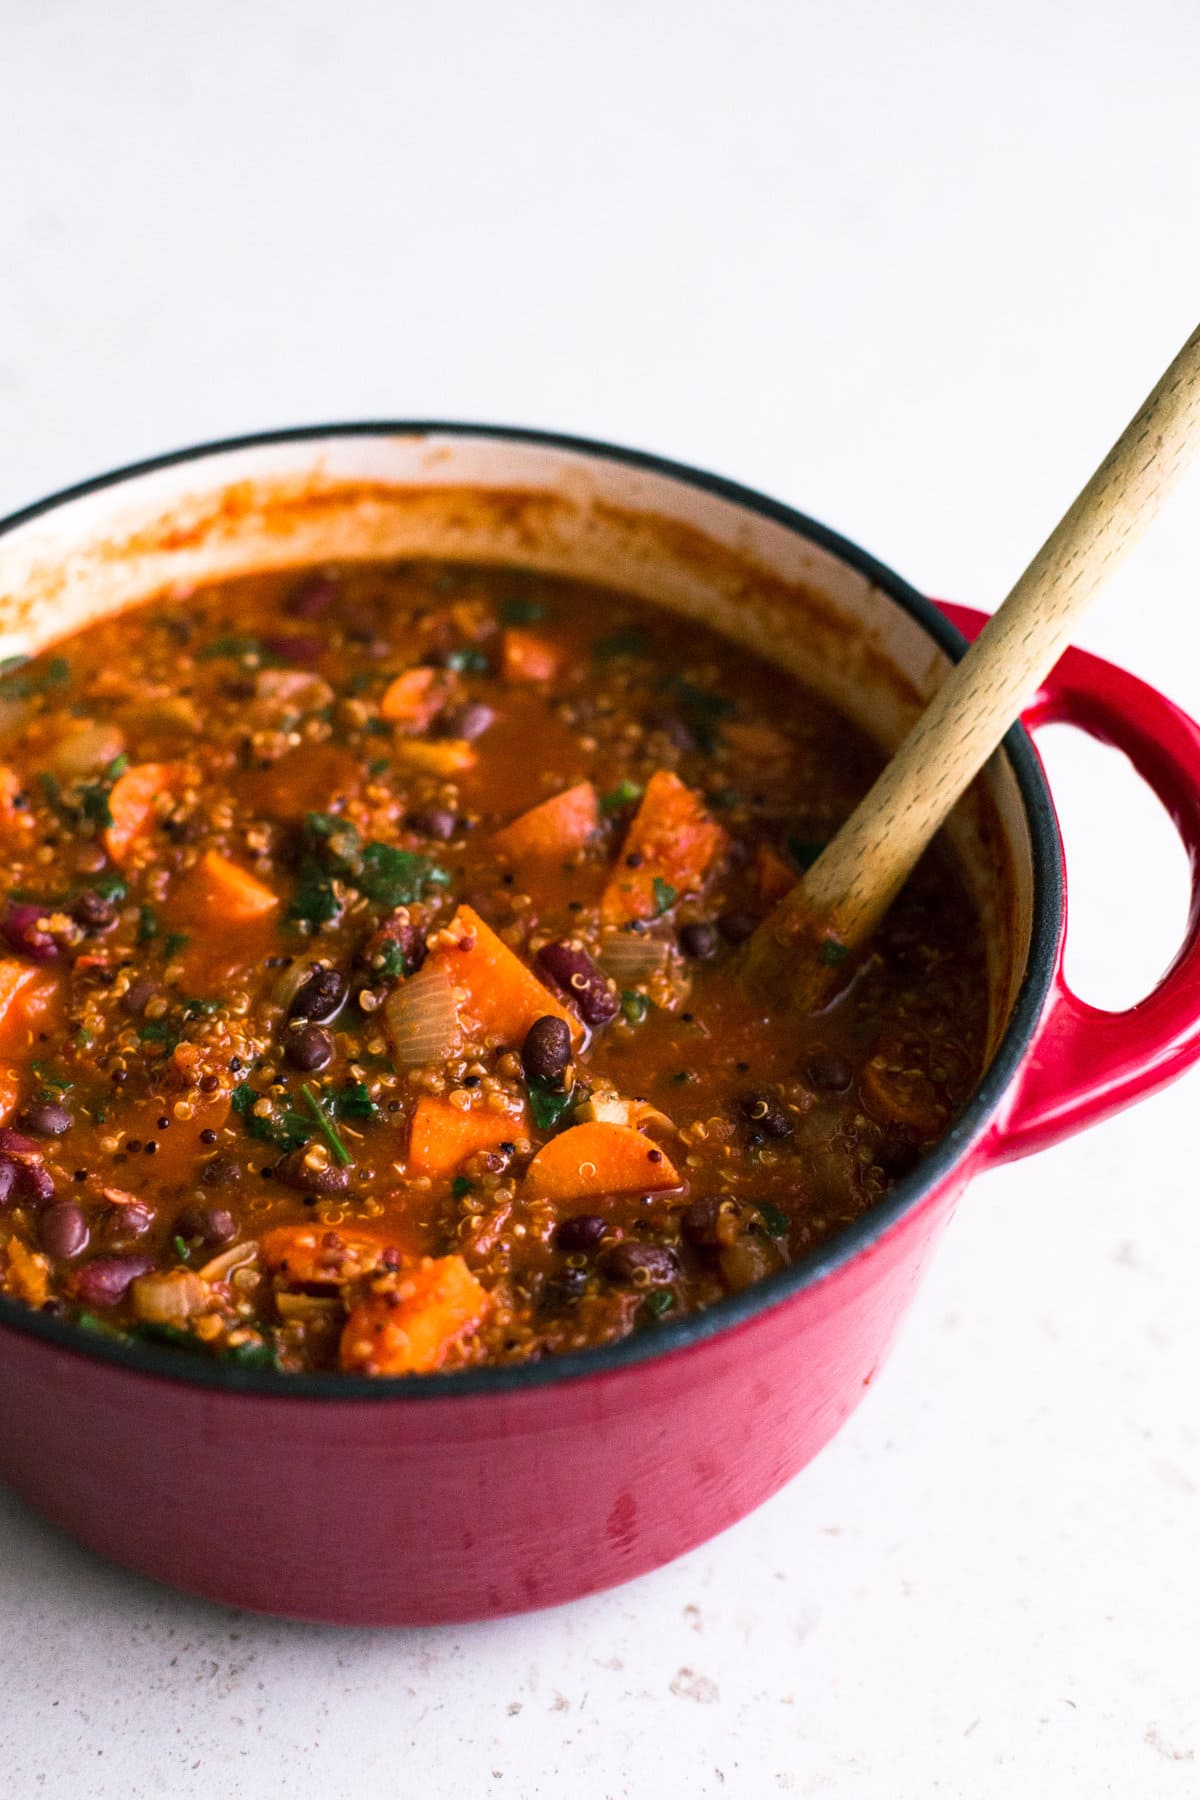 A delicious and hearty one pot Vegan Sweet Potato and Quinoa Chili. Ready in under one hour, Gluten Free, Low in Fat and made with common pantry staples. #vegan #chili #quinoa #healthy #simple #stew #hearty #veganchili #vegetarian #tomato #beans #onepot #mexican #soup #tortilla 